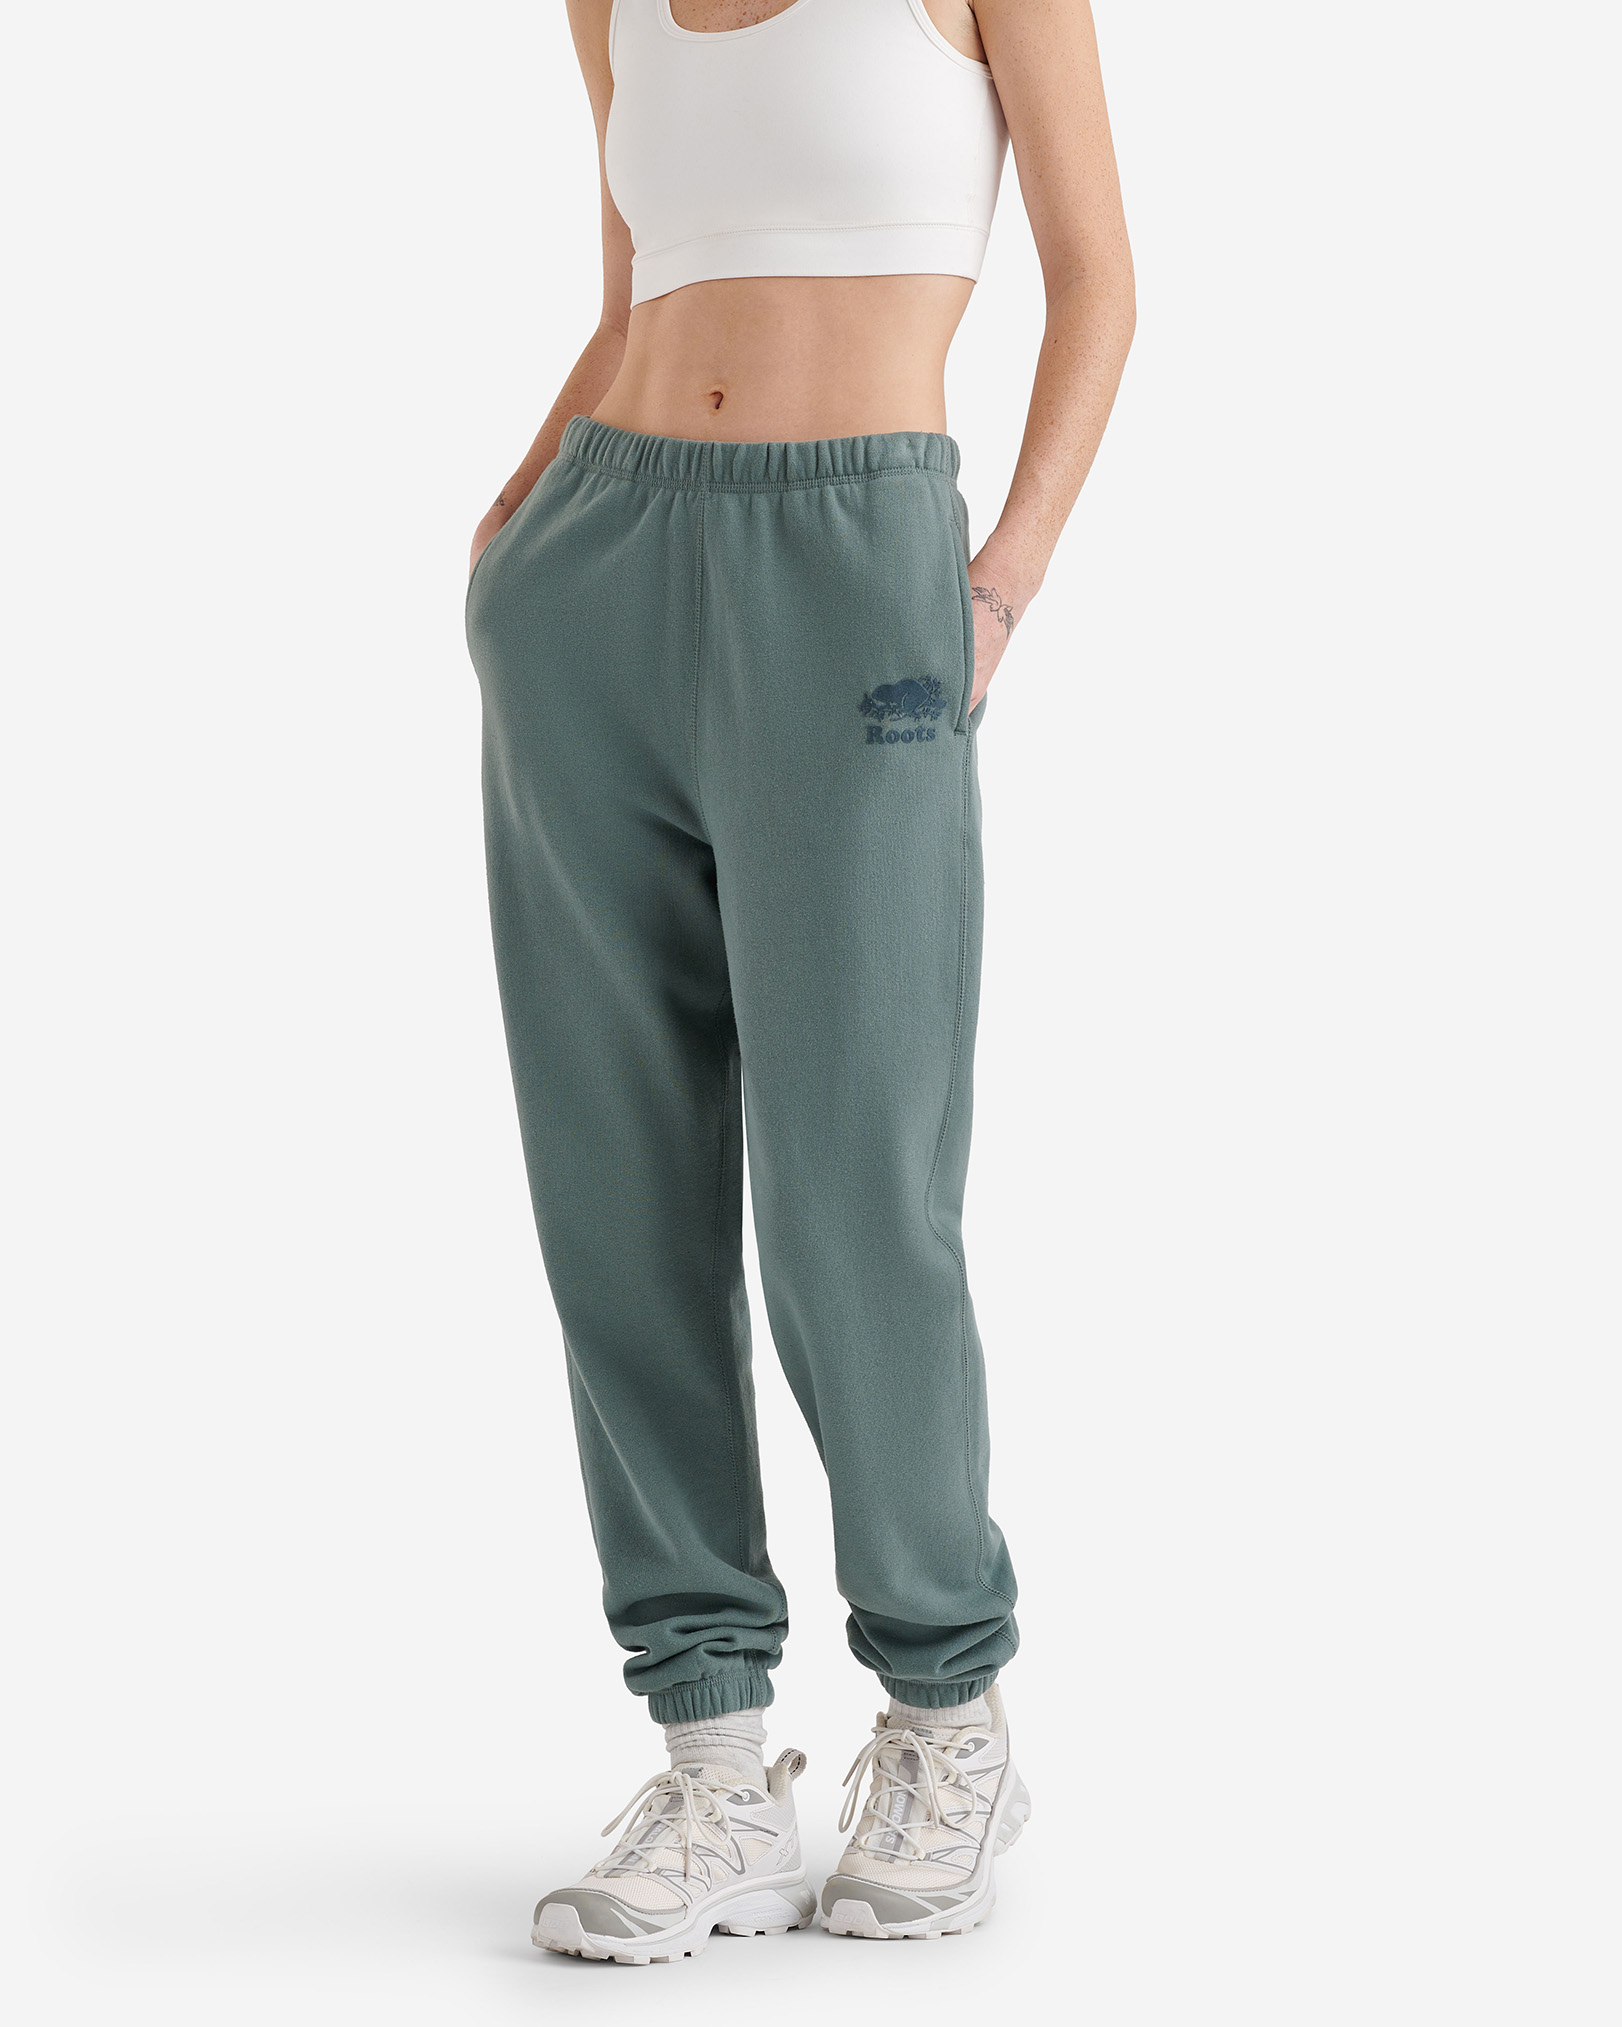 Roots Organic Cooper High Waisted Sweatpant in Balsam Green